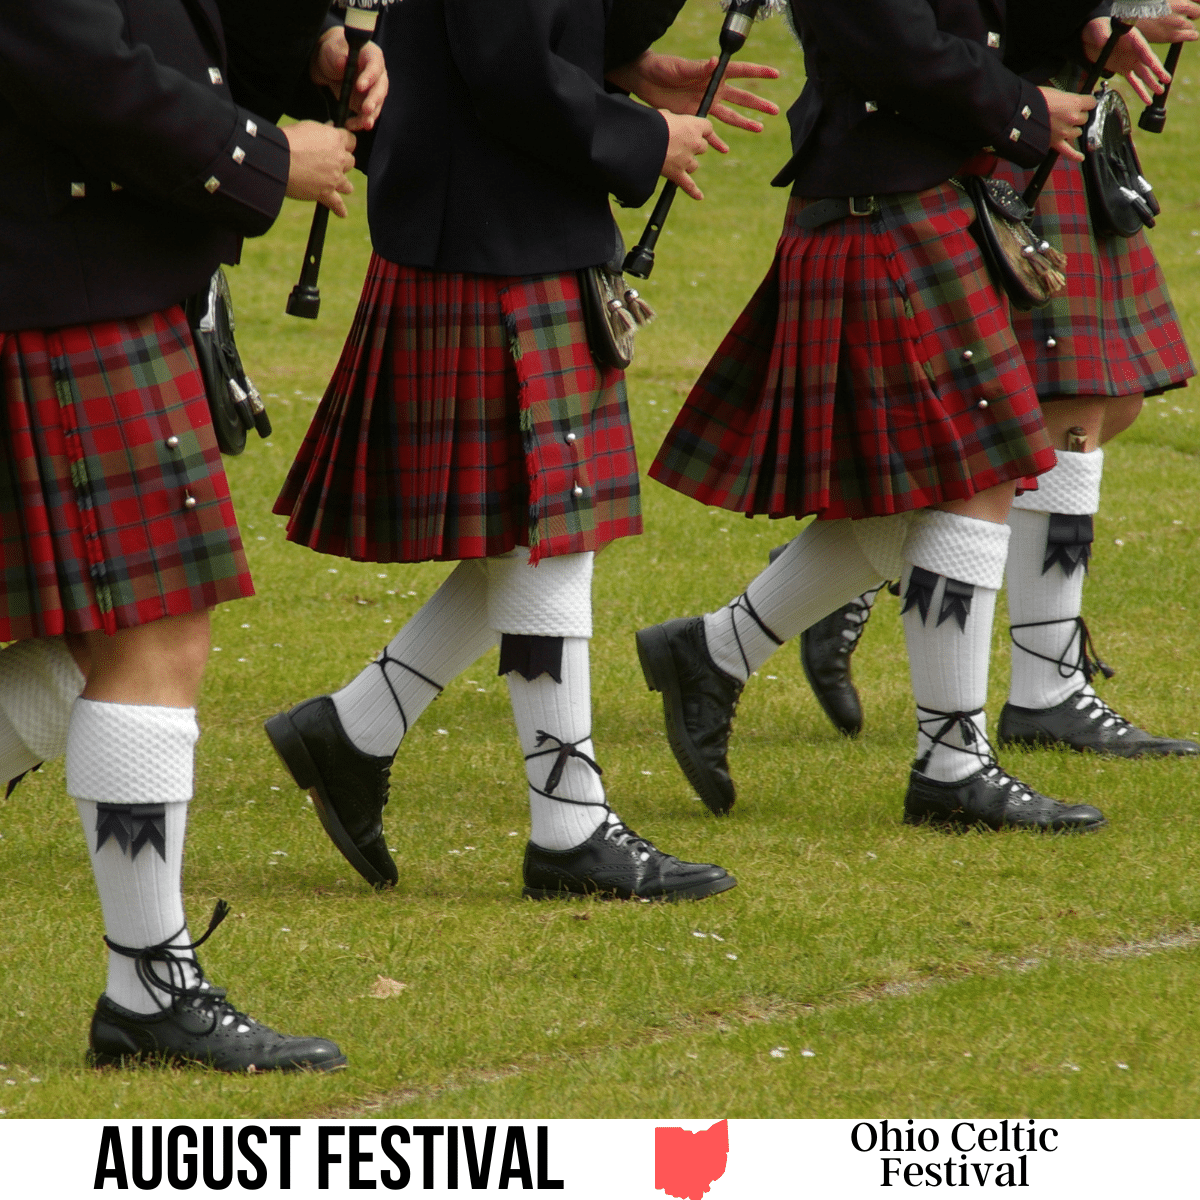 A square image of a close-up photo of four people wearing kilts, black jackets, white and black knee high socks, and black shoes, playing a musical instrument in the grass. A white strip across the bottom has text August Festival Ohio Celtic Festival.